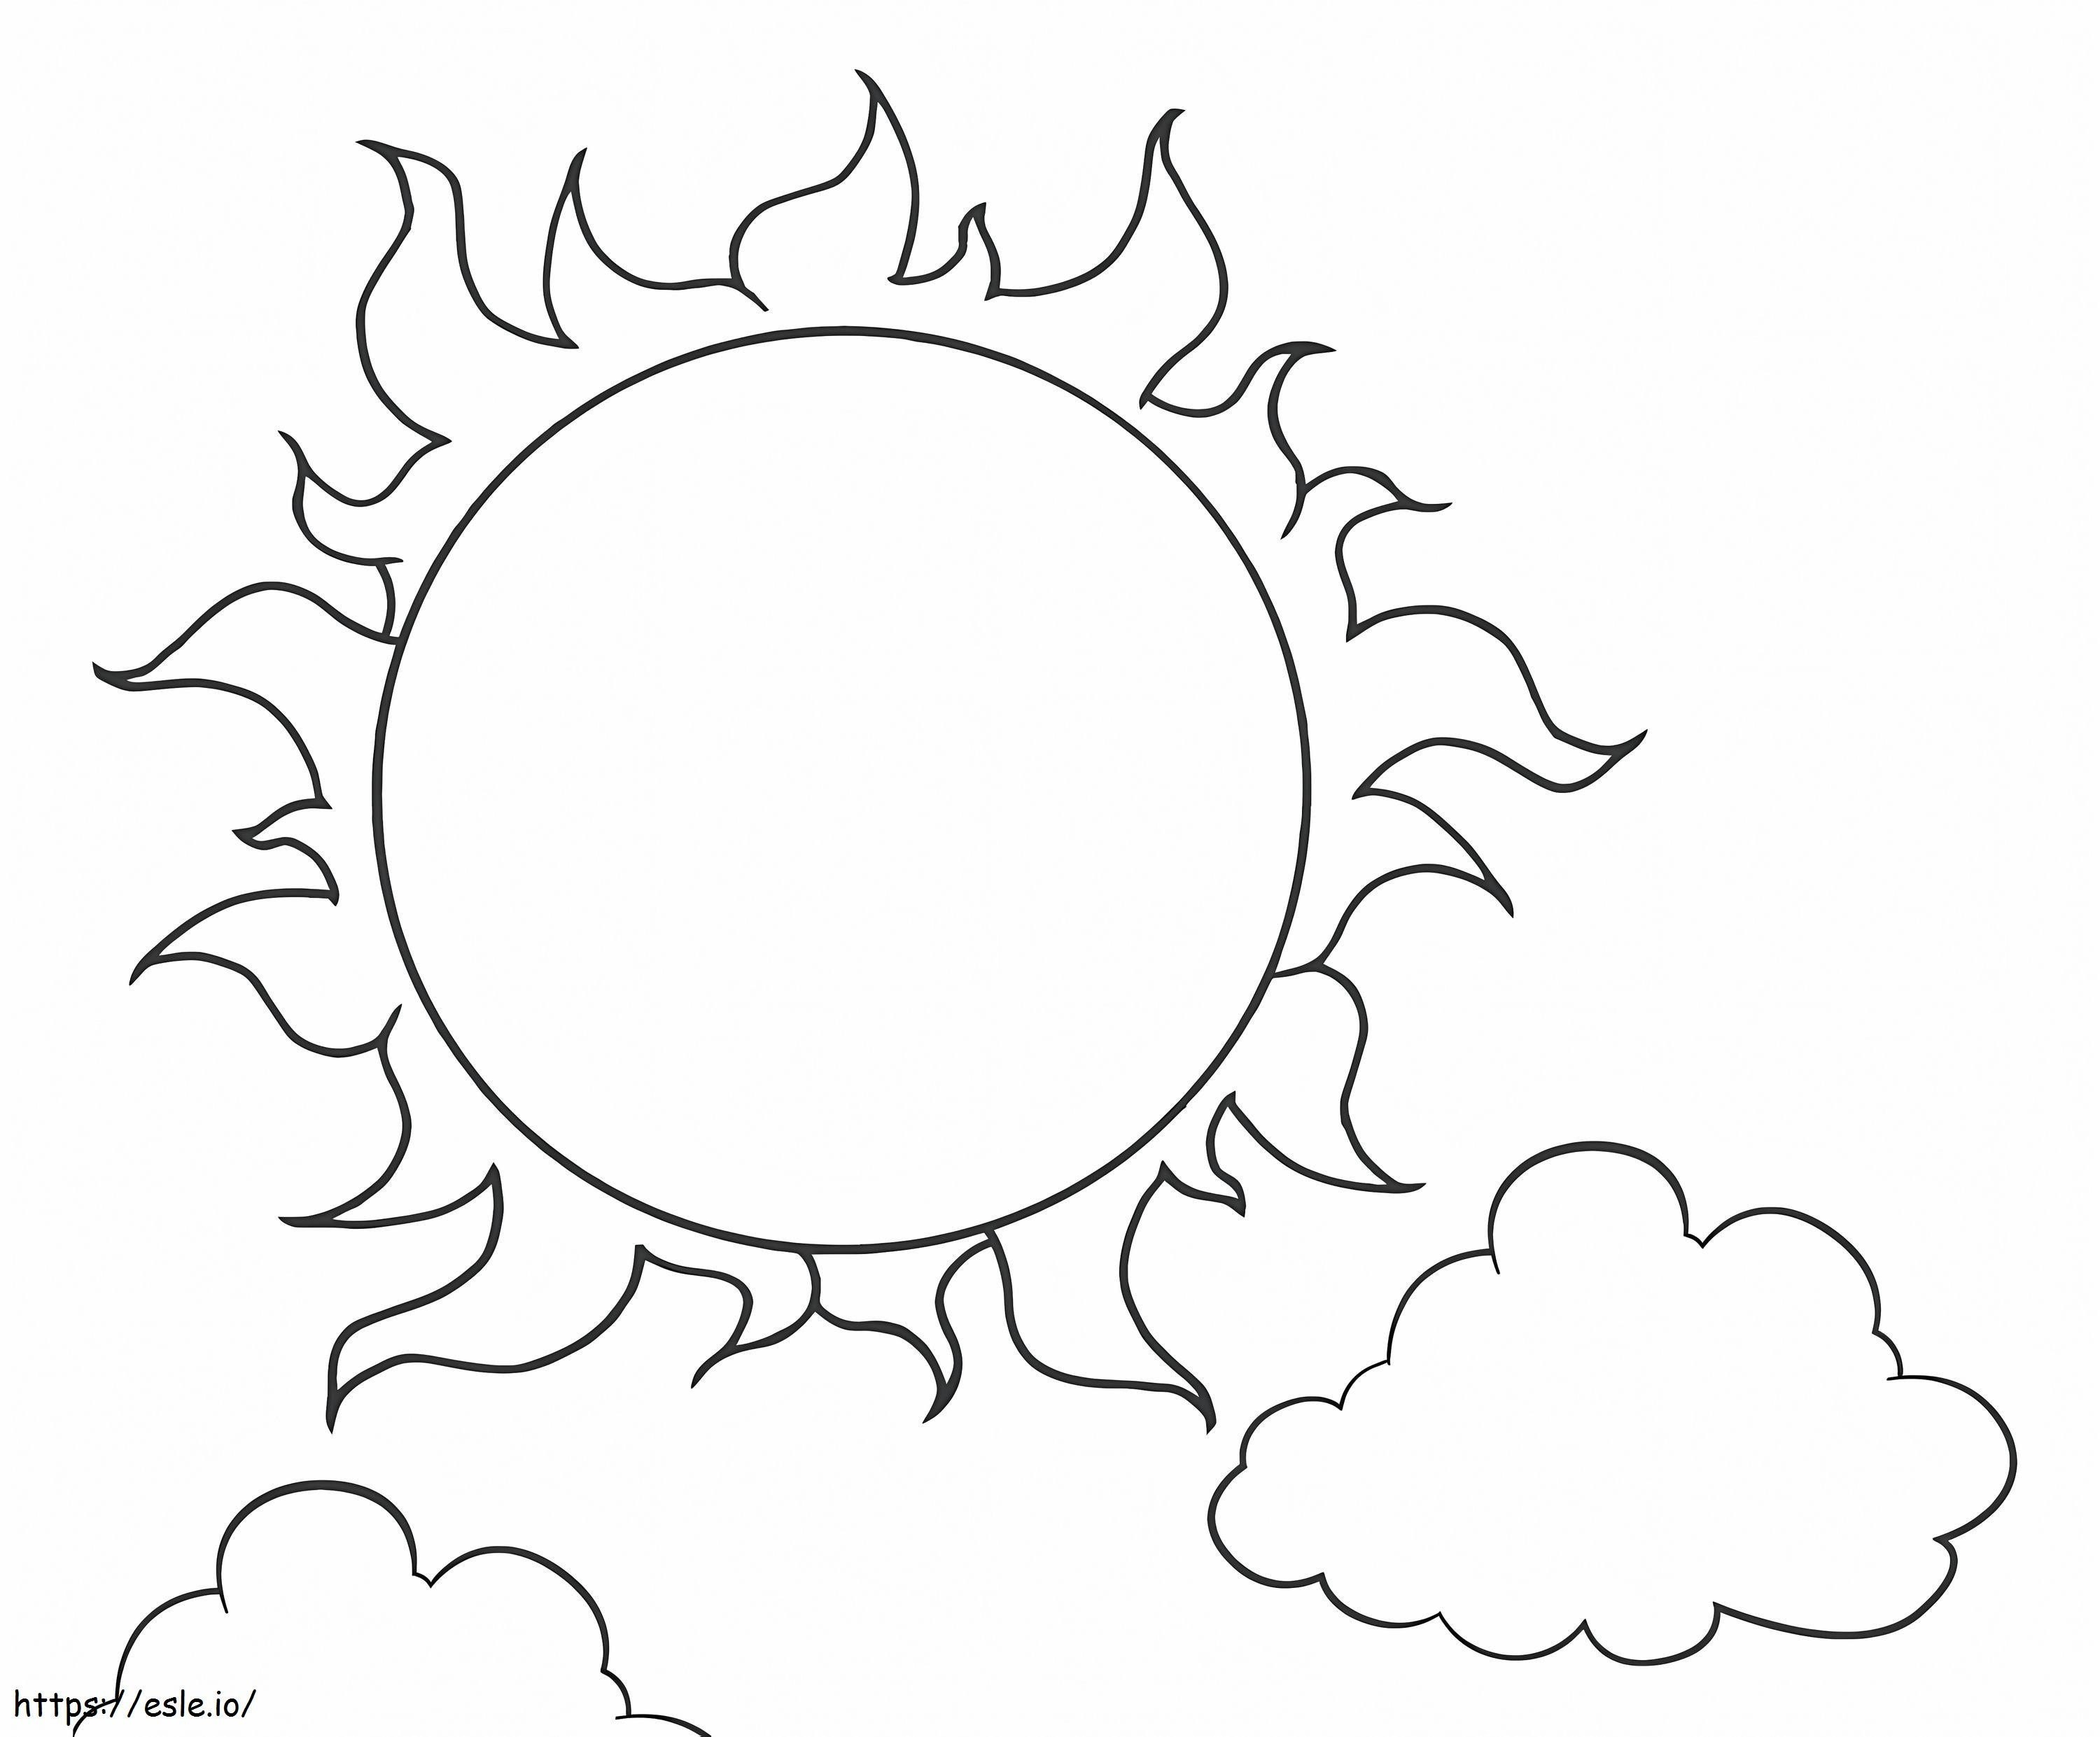 Basic Sun With Clouds coloring page